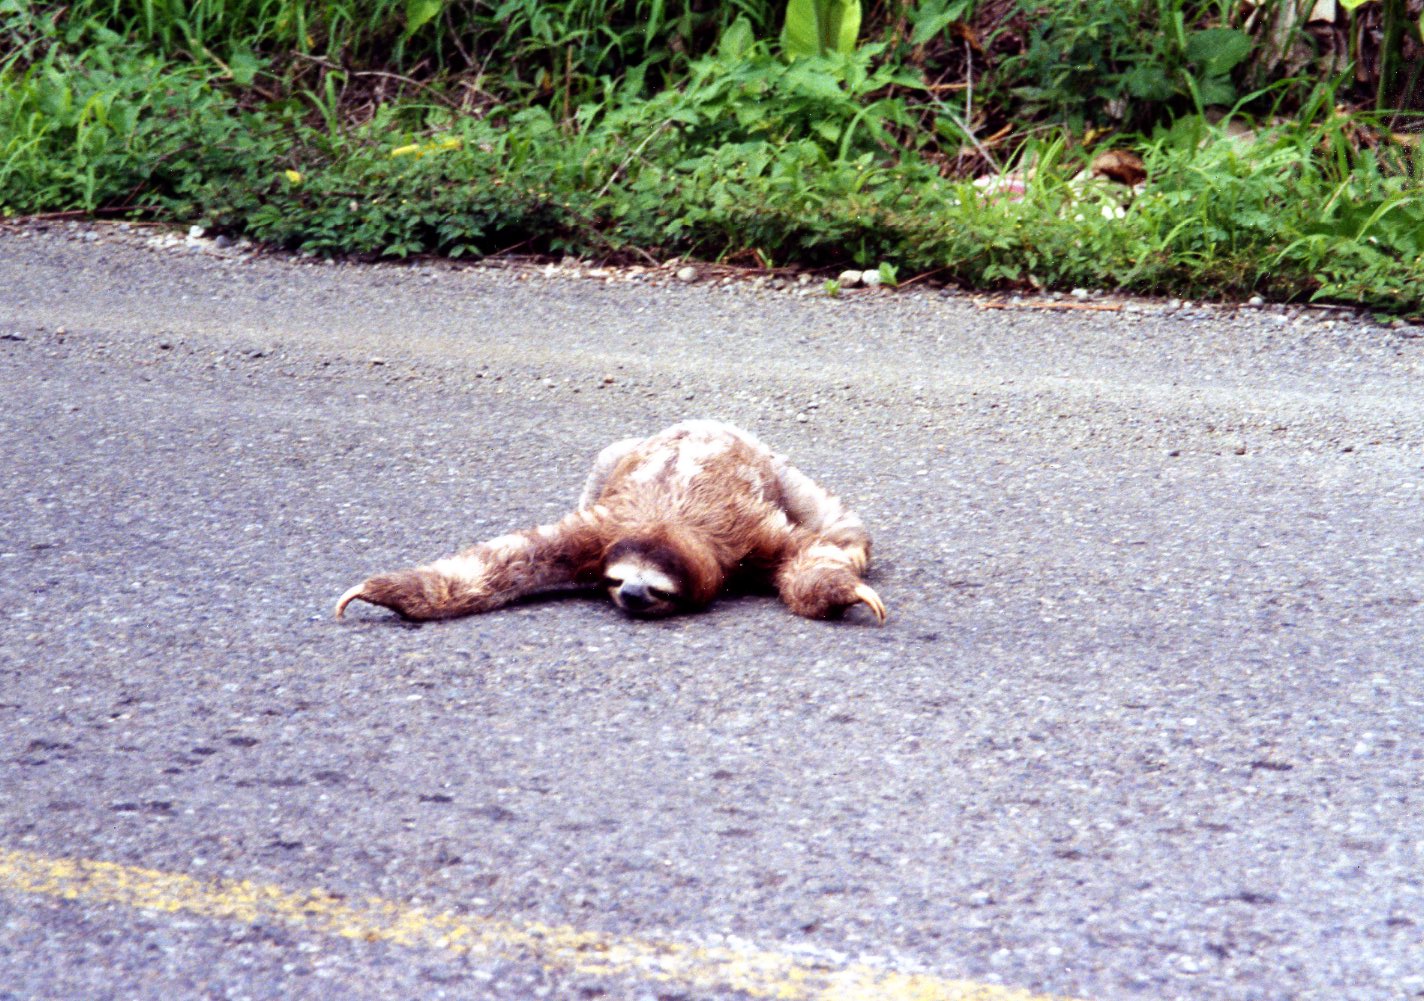 A sloth rather helplessly trying to cross a road